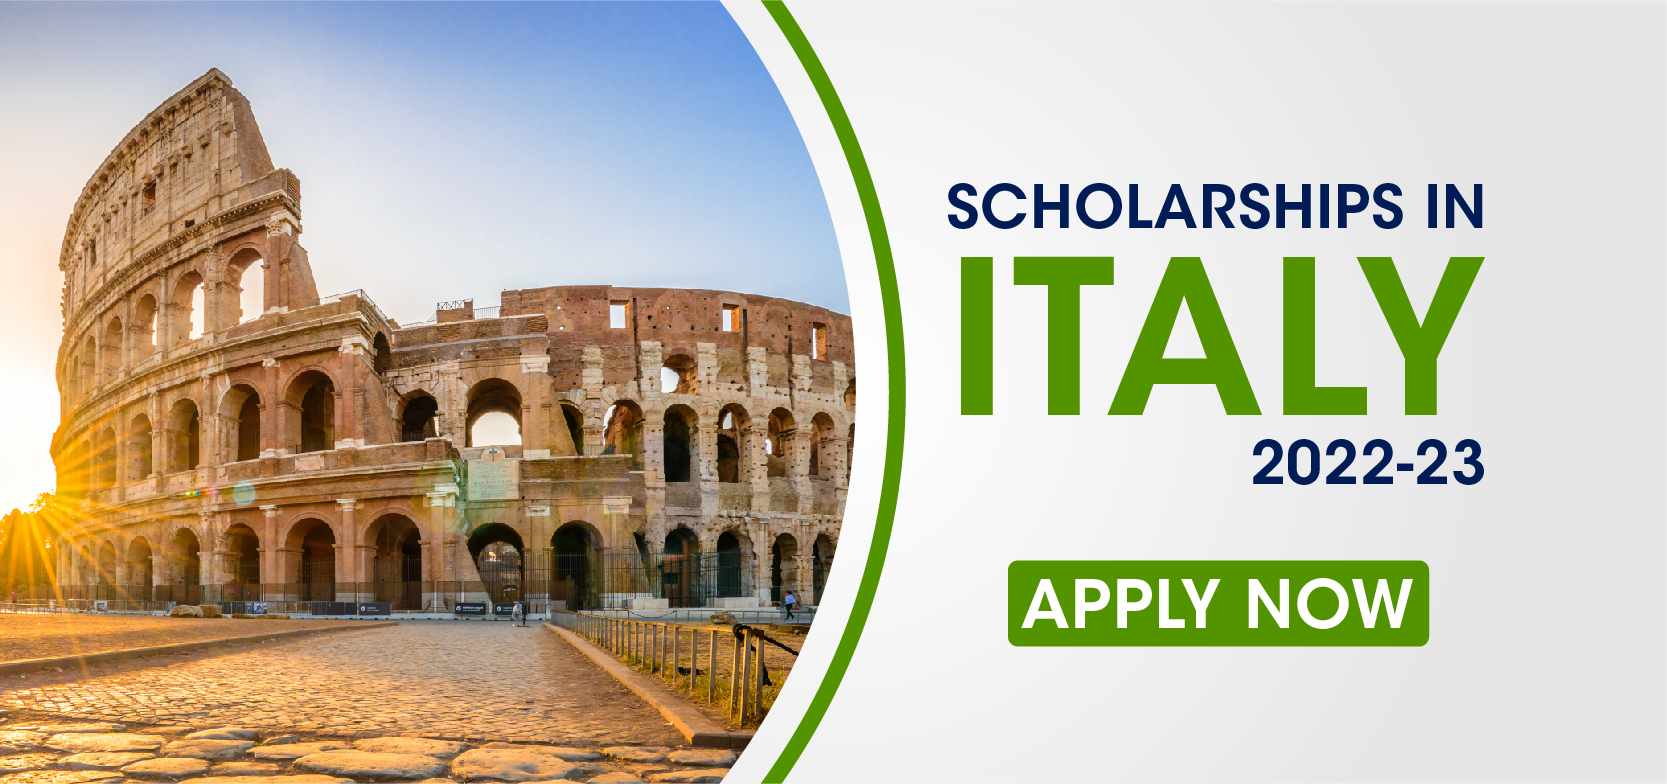 Fully Funded Scholarships In Italy For Pakistani Students 2022-23 |  Applications  Visa Requirements From Pakistan - Study Abroad with Twelve  Consultants | Study In Hungary | Study In Russia | Study In China